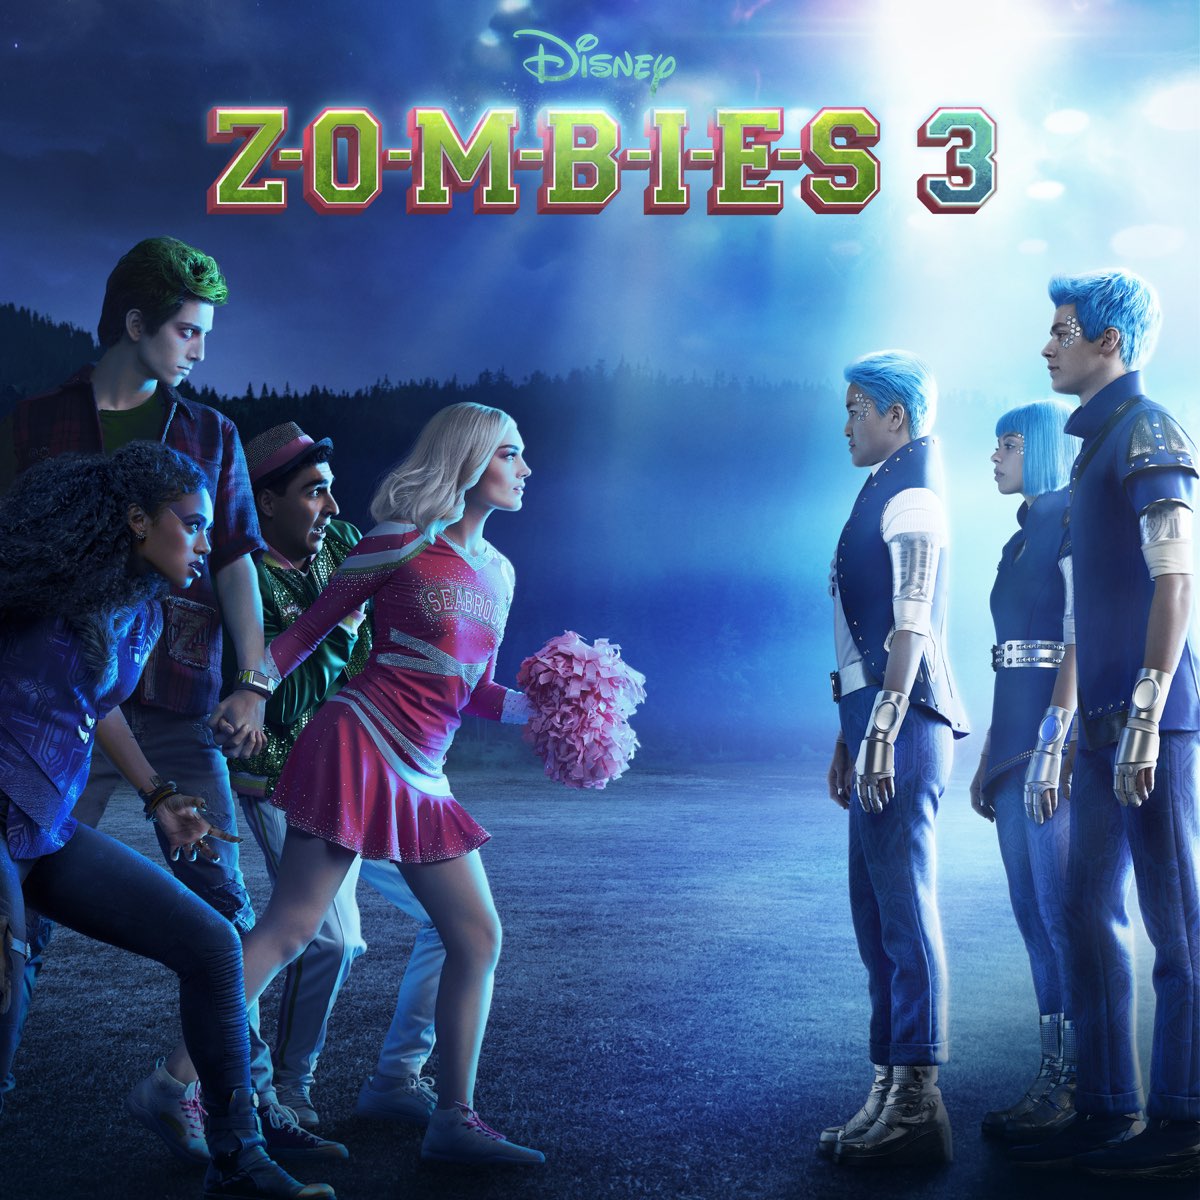 ‎ZOMBIES 3 (Original Soundtrack) by ZOMBIES Cast on Apple Music